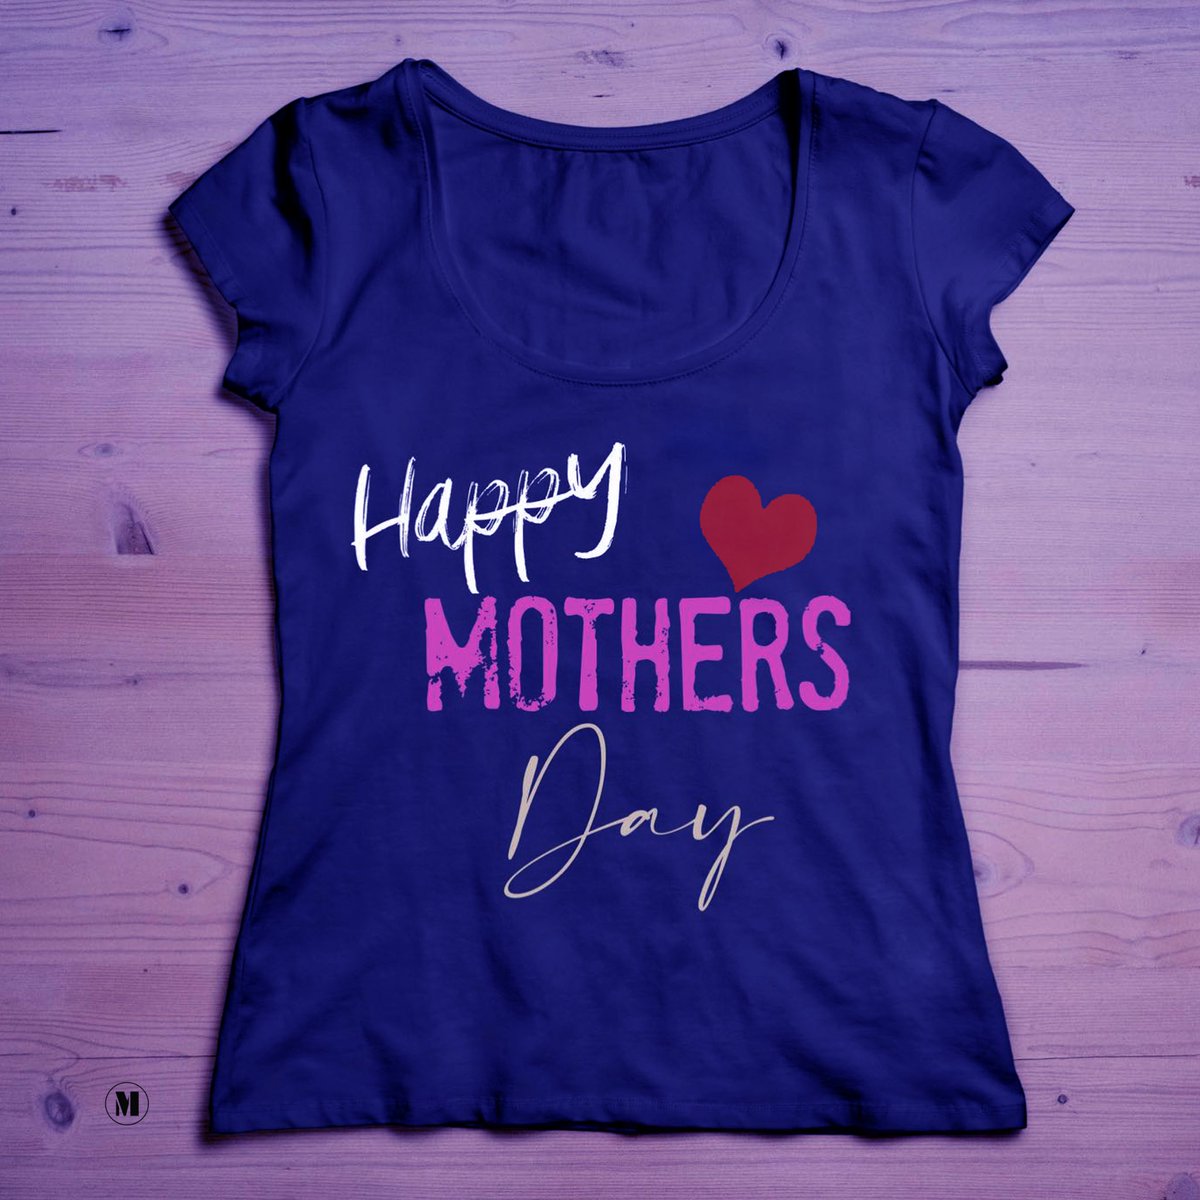 I believe in that creative connected future... 'HAPPY MOTHER'S DAY 2024' 

......................... 
#printondemand #africanprint #tshirts #hoodie #decorativepillows #canvasbags #motherslove #culture #identity #fabric4rlifestyle